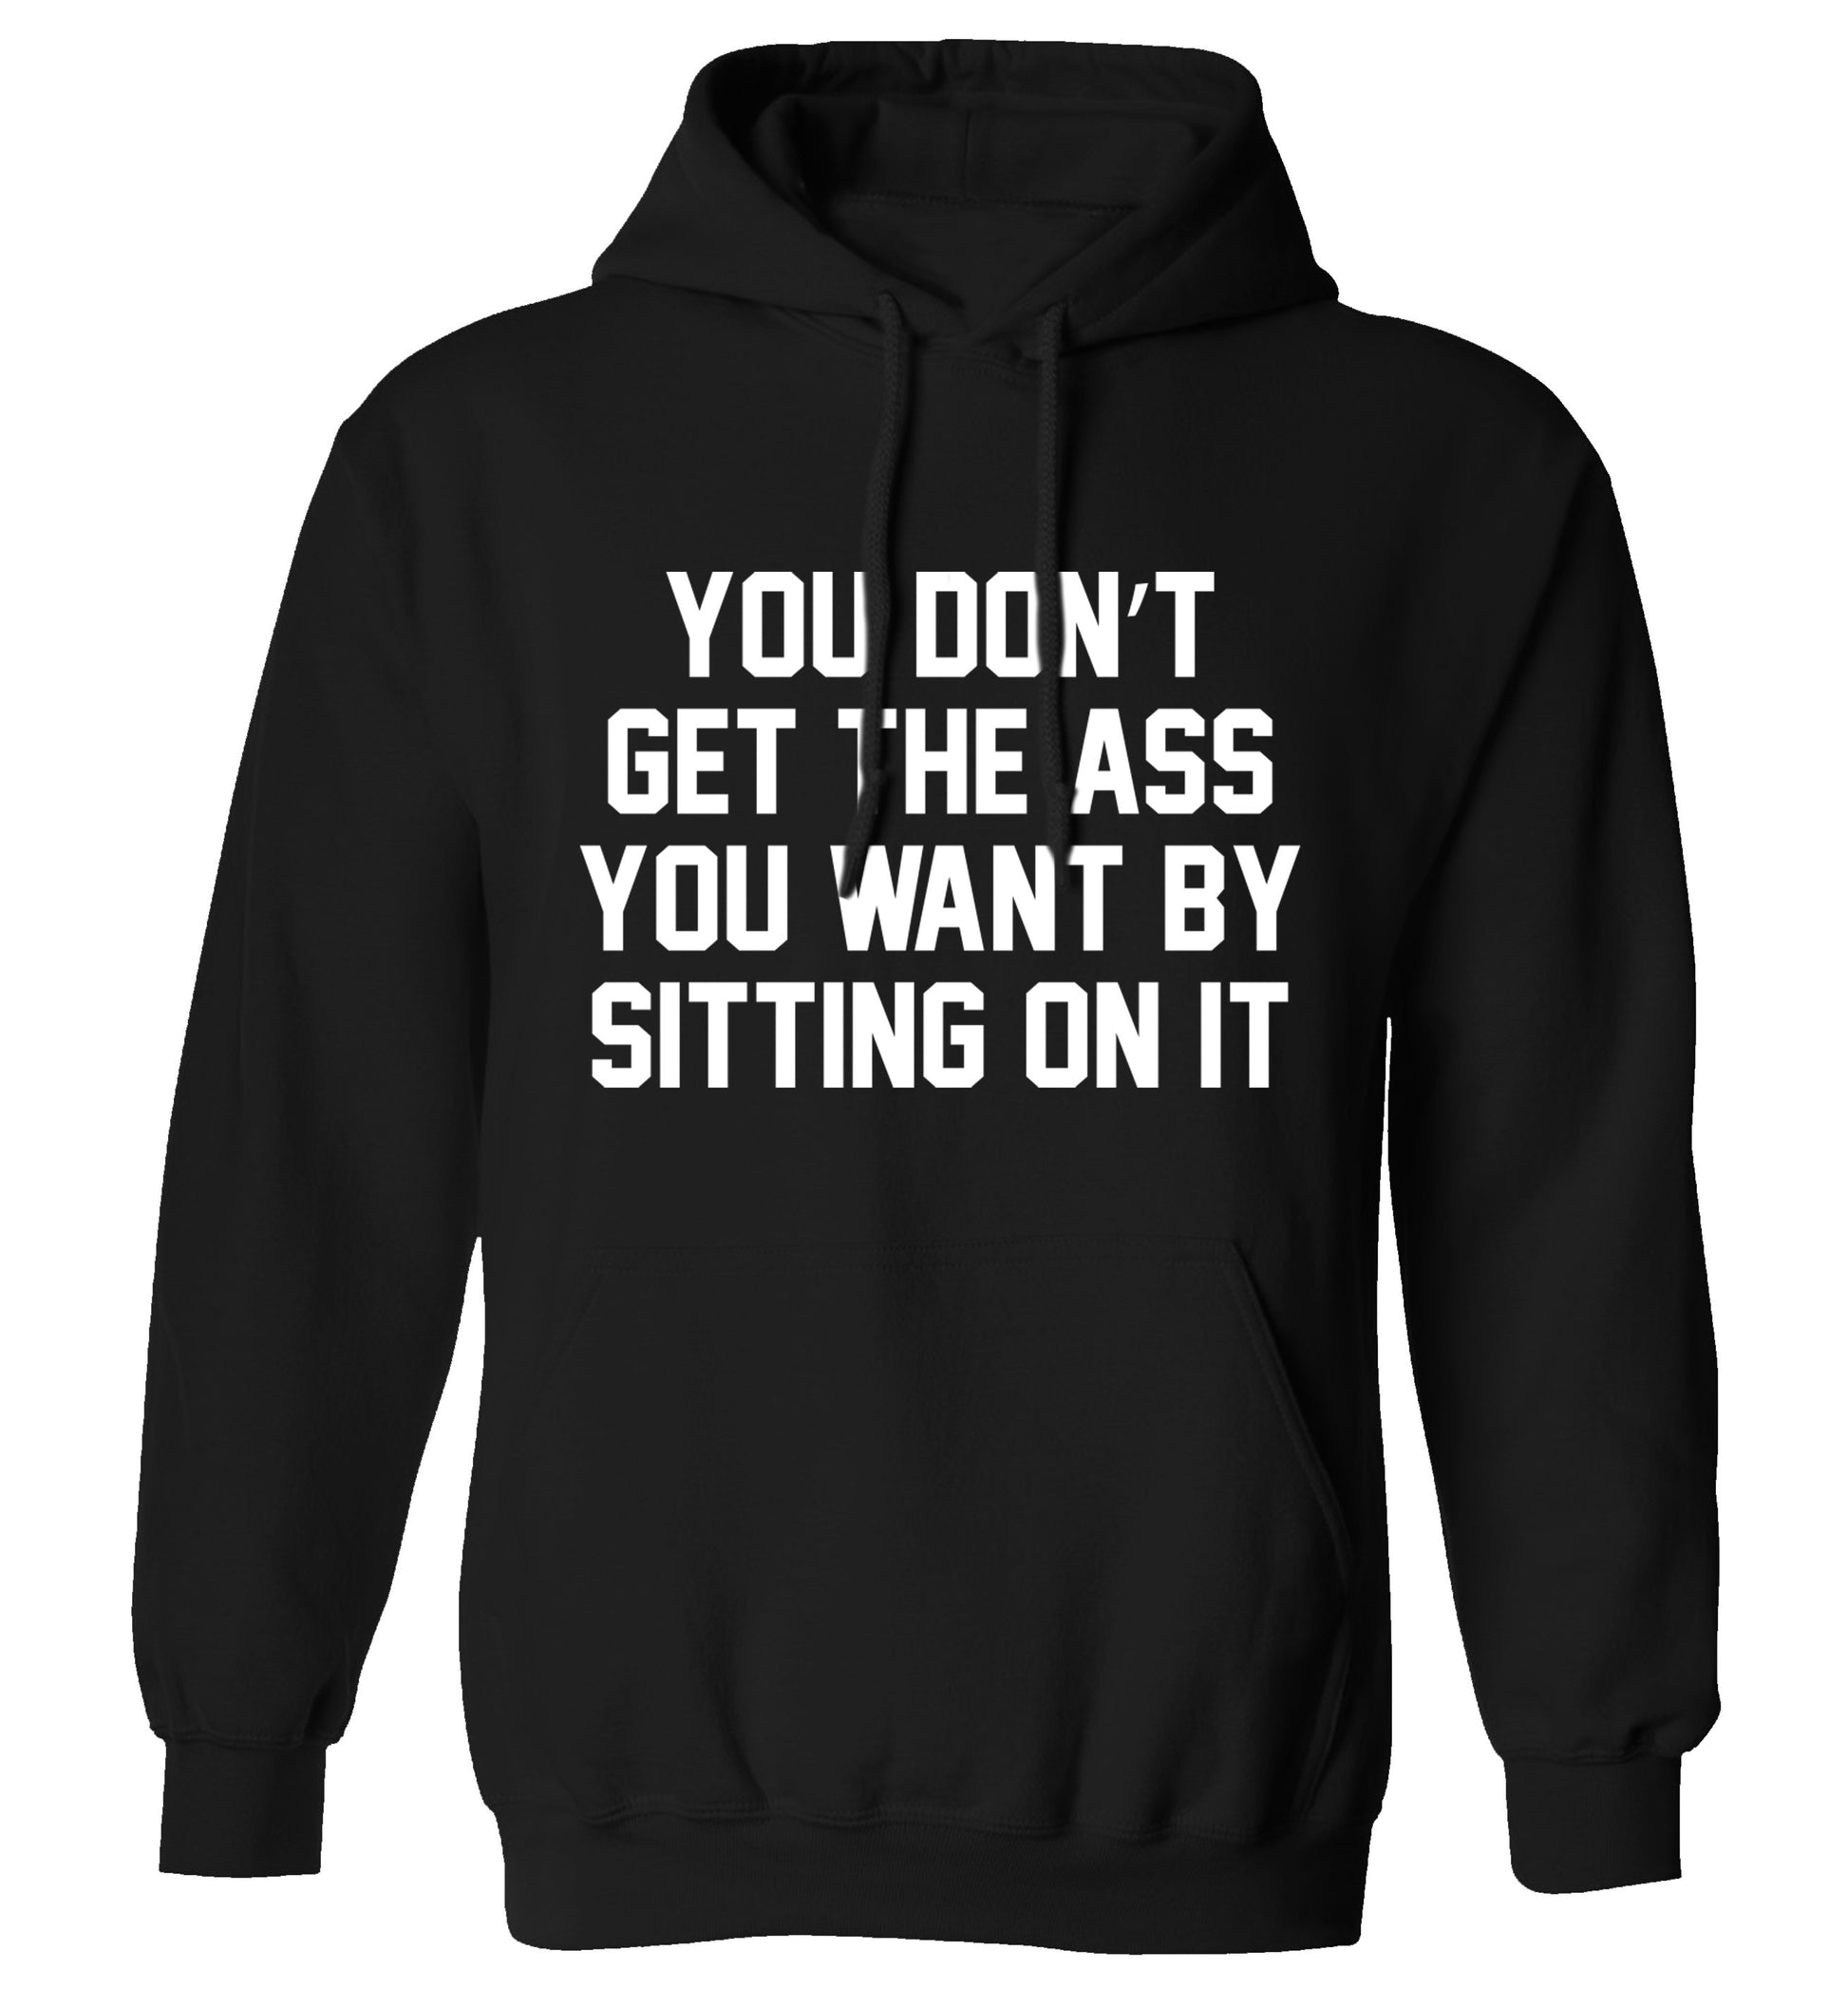 You don't get the ass you want by sitting on it adults unisex black hoodie 2XL